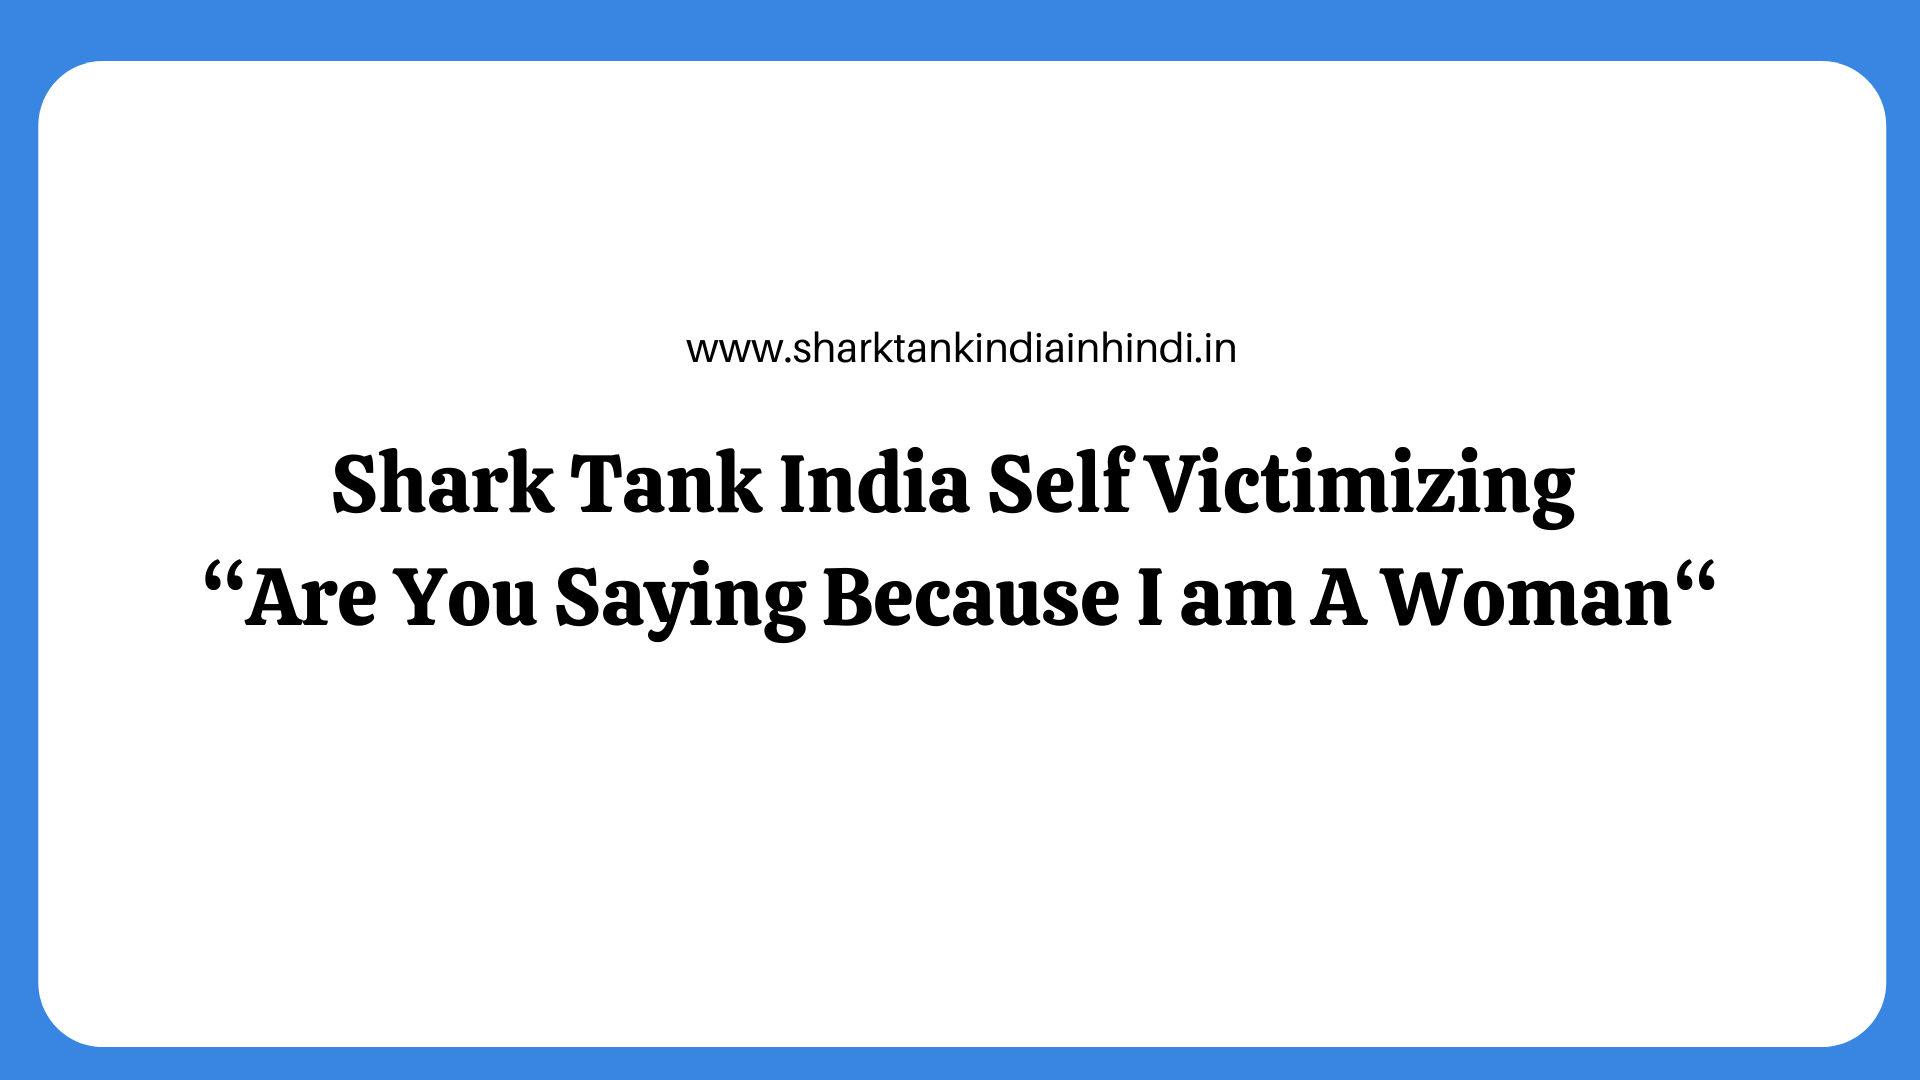 Shark Tank India Self Victimizing “Are You Saying Because I am A Woman“